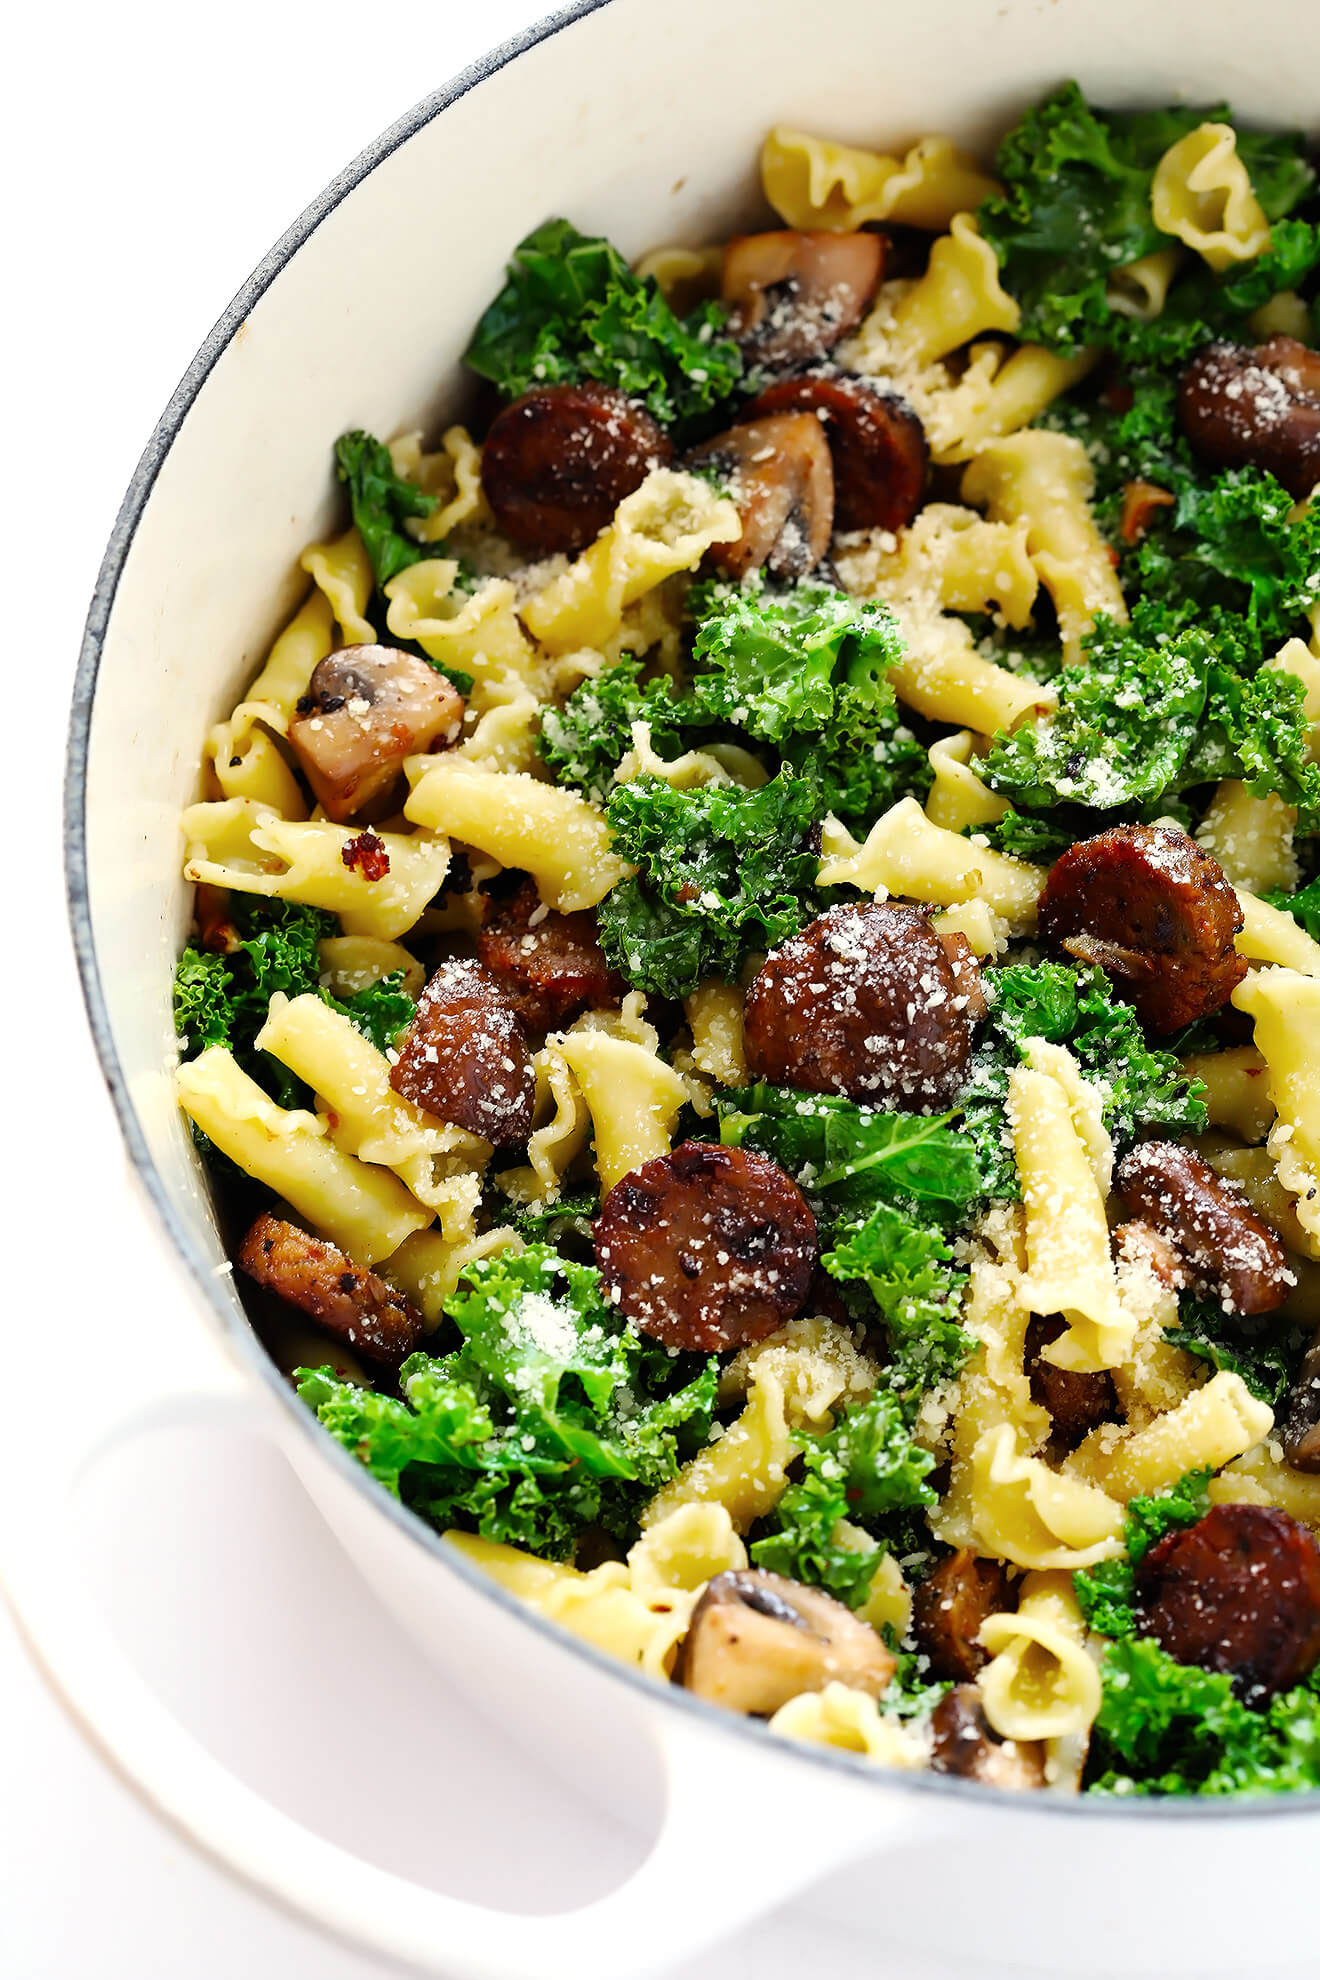 Pasta with Italian Sausage, Kale and Mushrooms | Gimme Some Oven